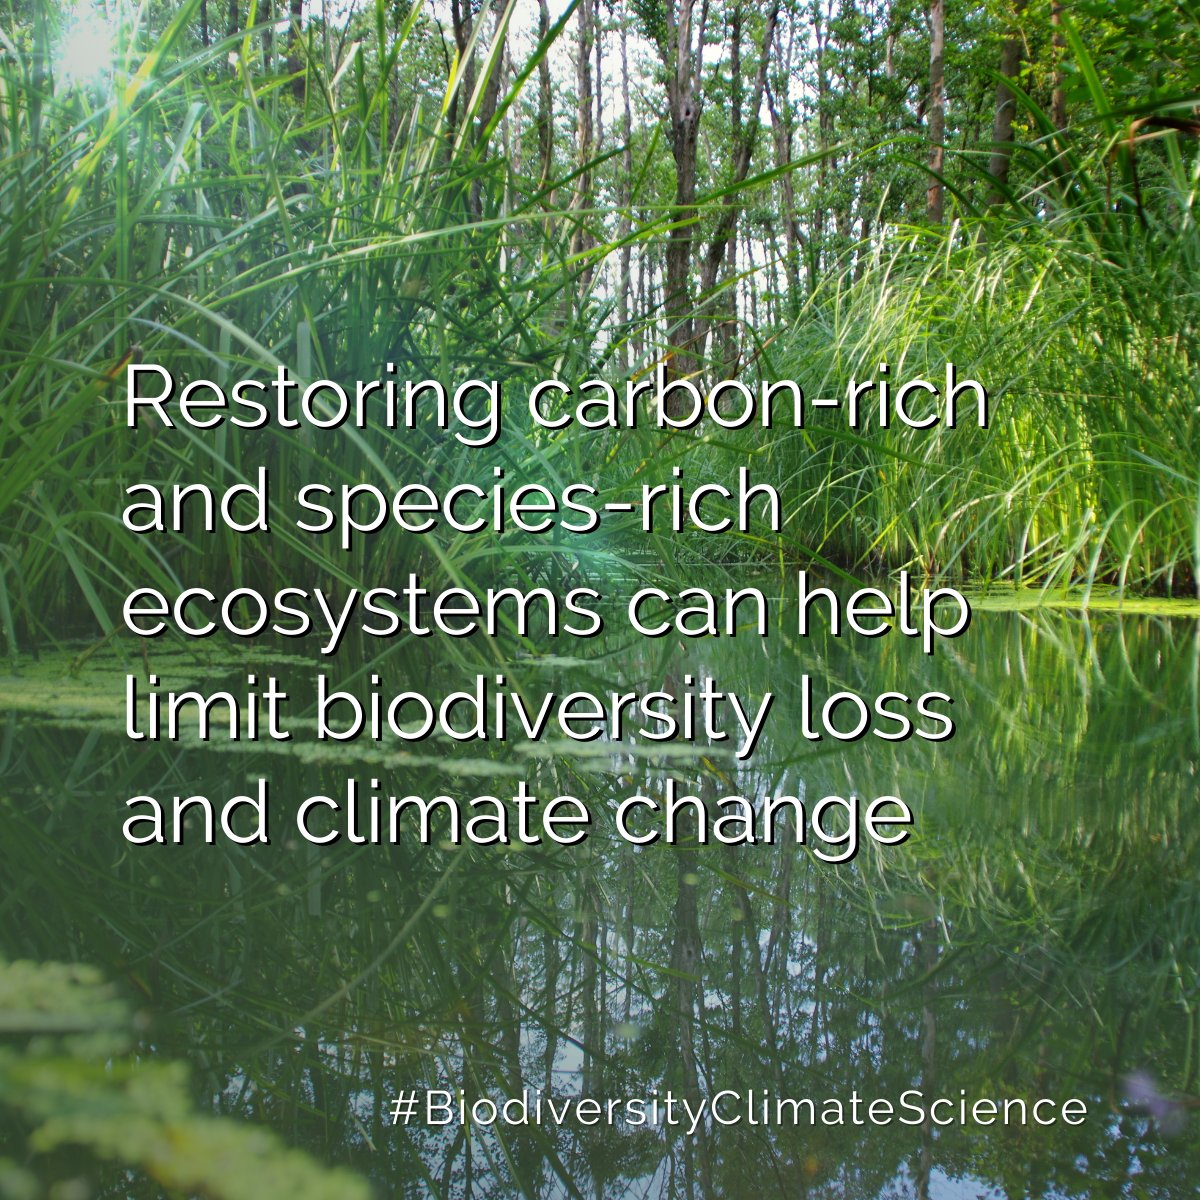 🦋🌡️#BiodiversityClimateScience shows restoration is among the cheapest and quickest nature-based climate mitigation measures

It enhances the resilience of biodiversity in the face of #ClimateChange & brings many benefits for people & #ForNature

ipbes.net/events/ipbes-i…